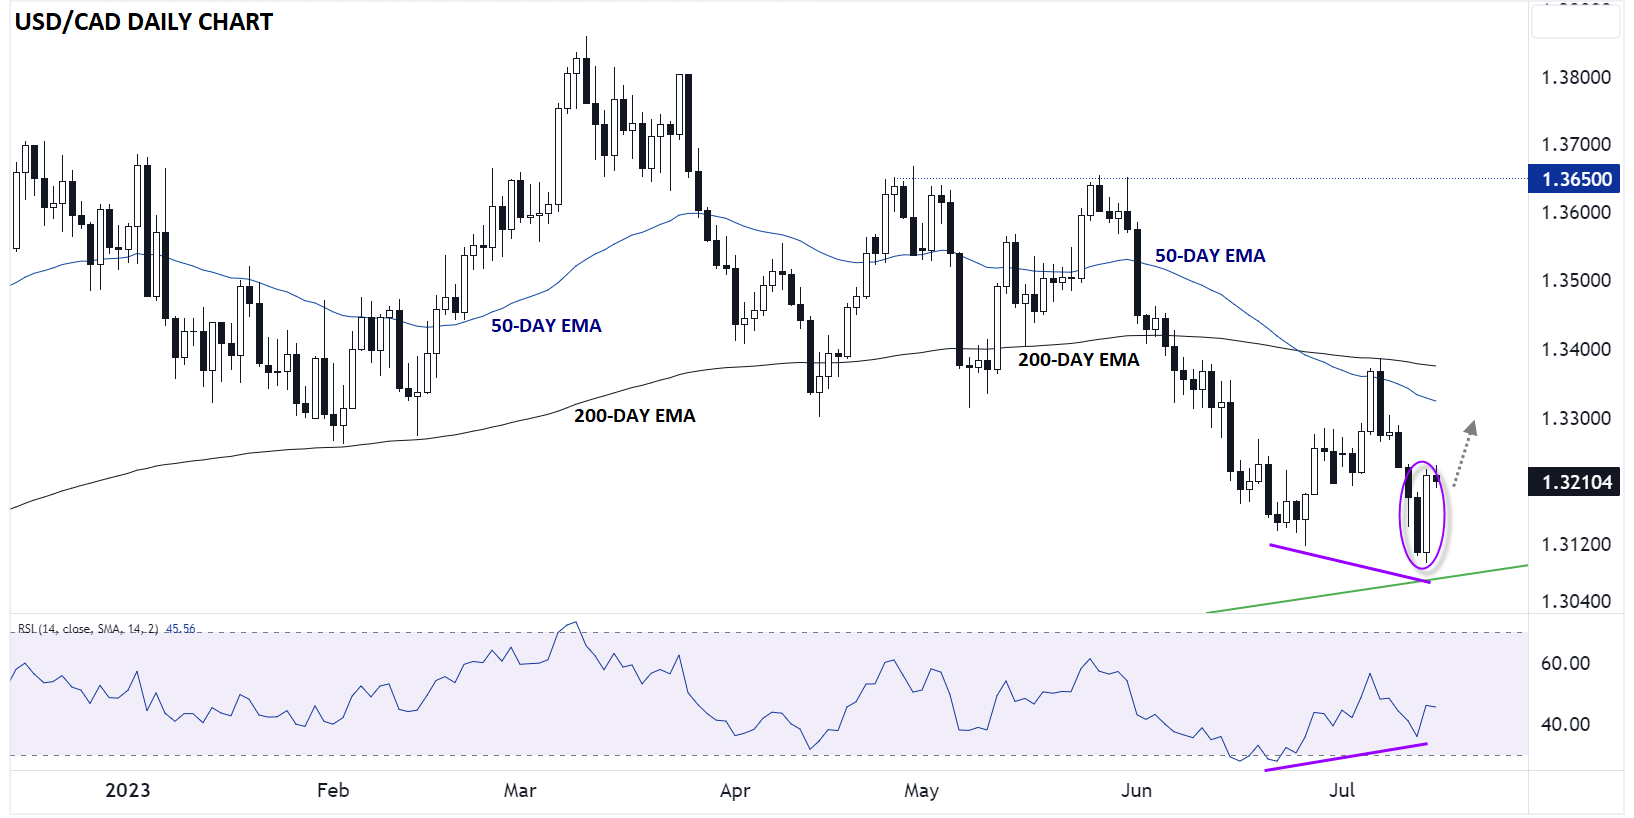 USD/CAD Price Analysis: Breaks through 50-day EMA resistance